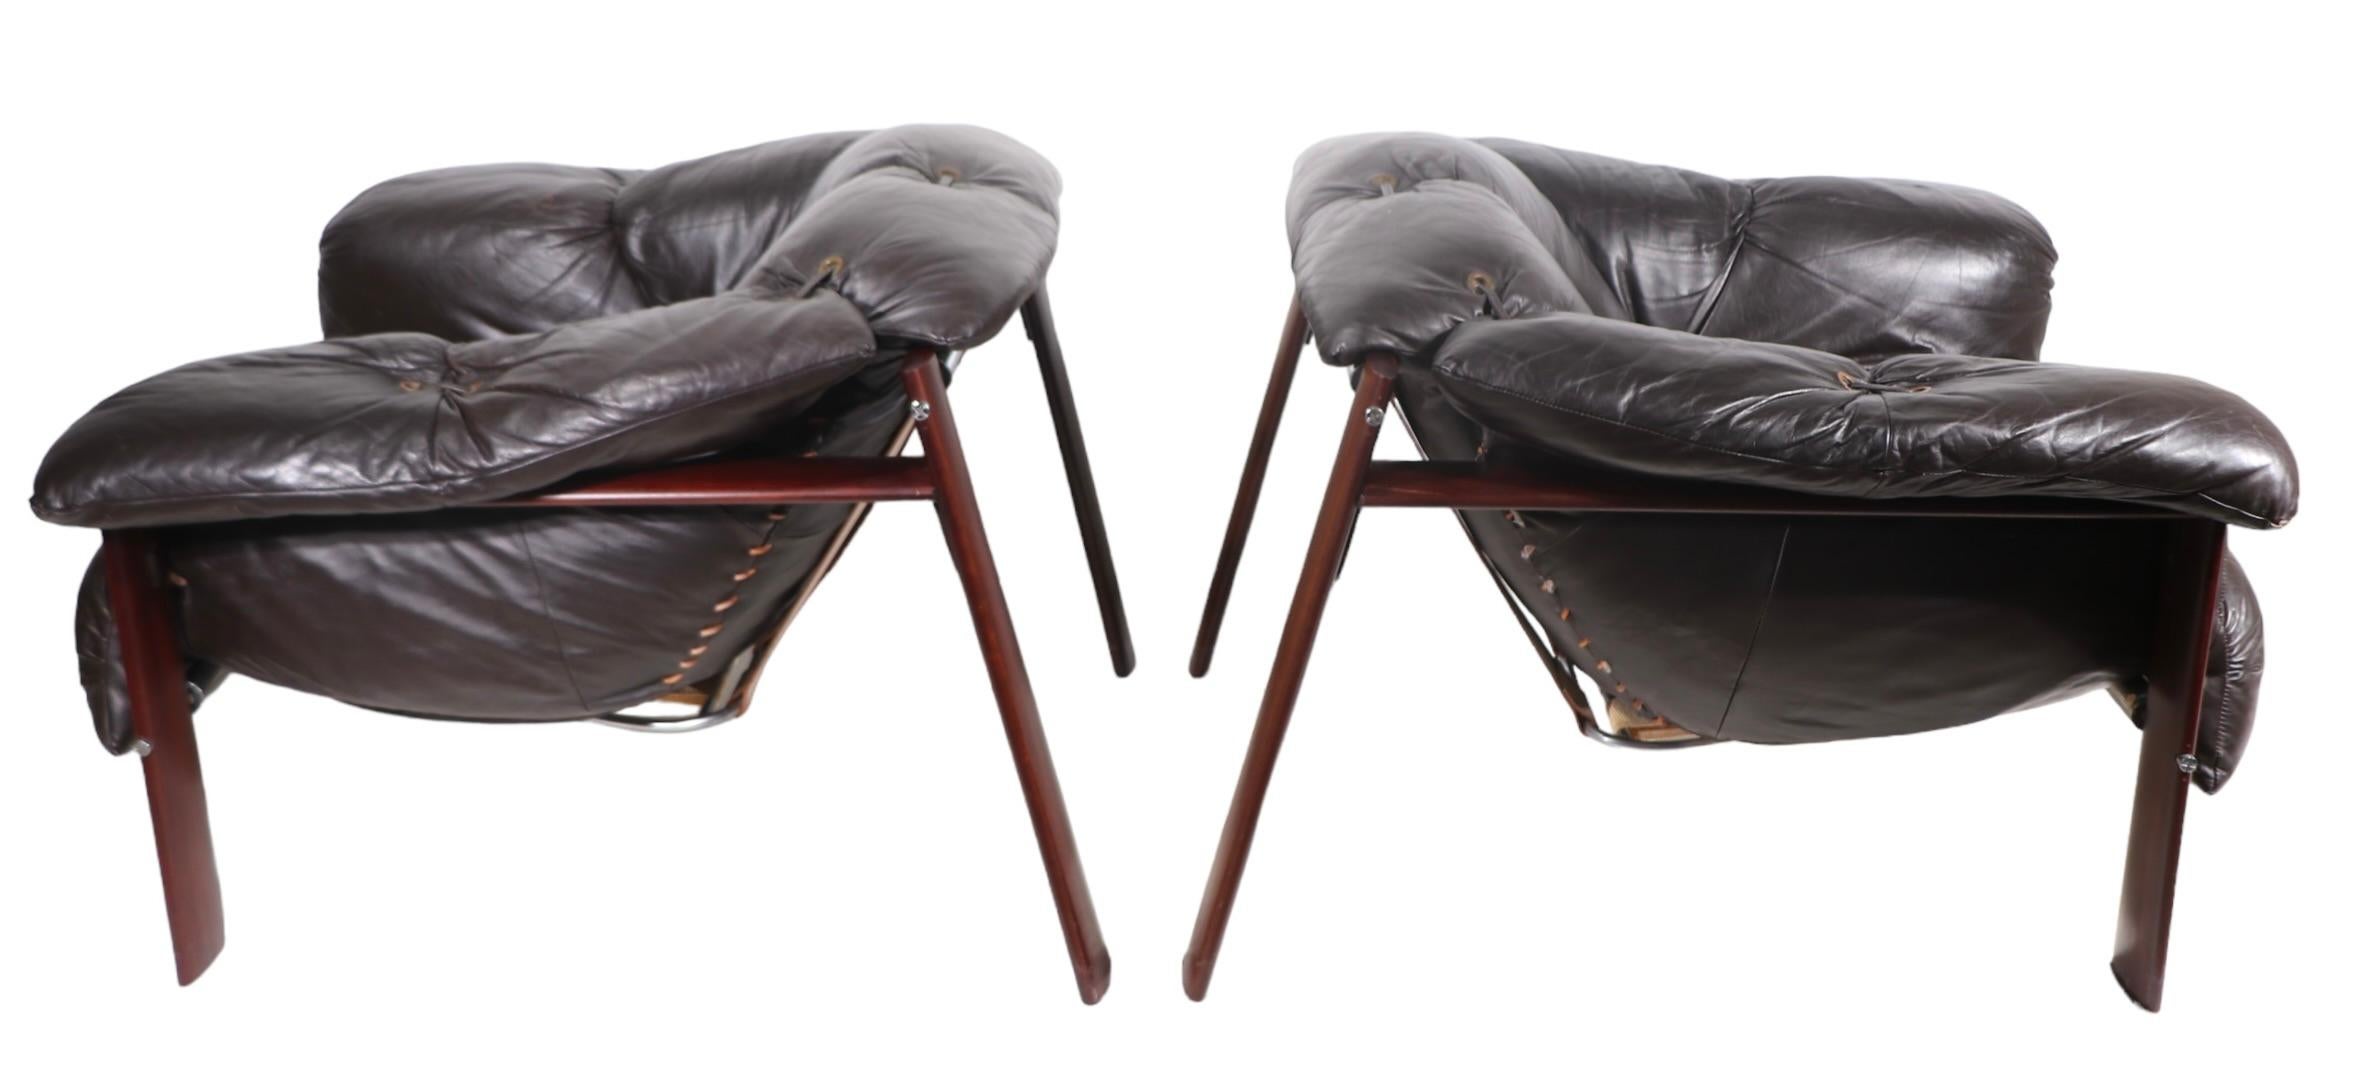 Pr. Lounge Chairs by Percival Lafer made in Brazil c. 1970’s For Sale 6